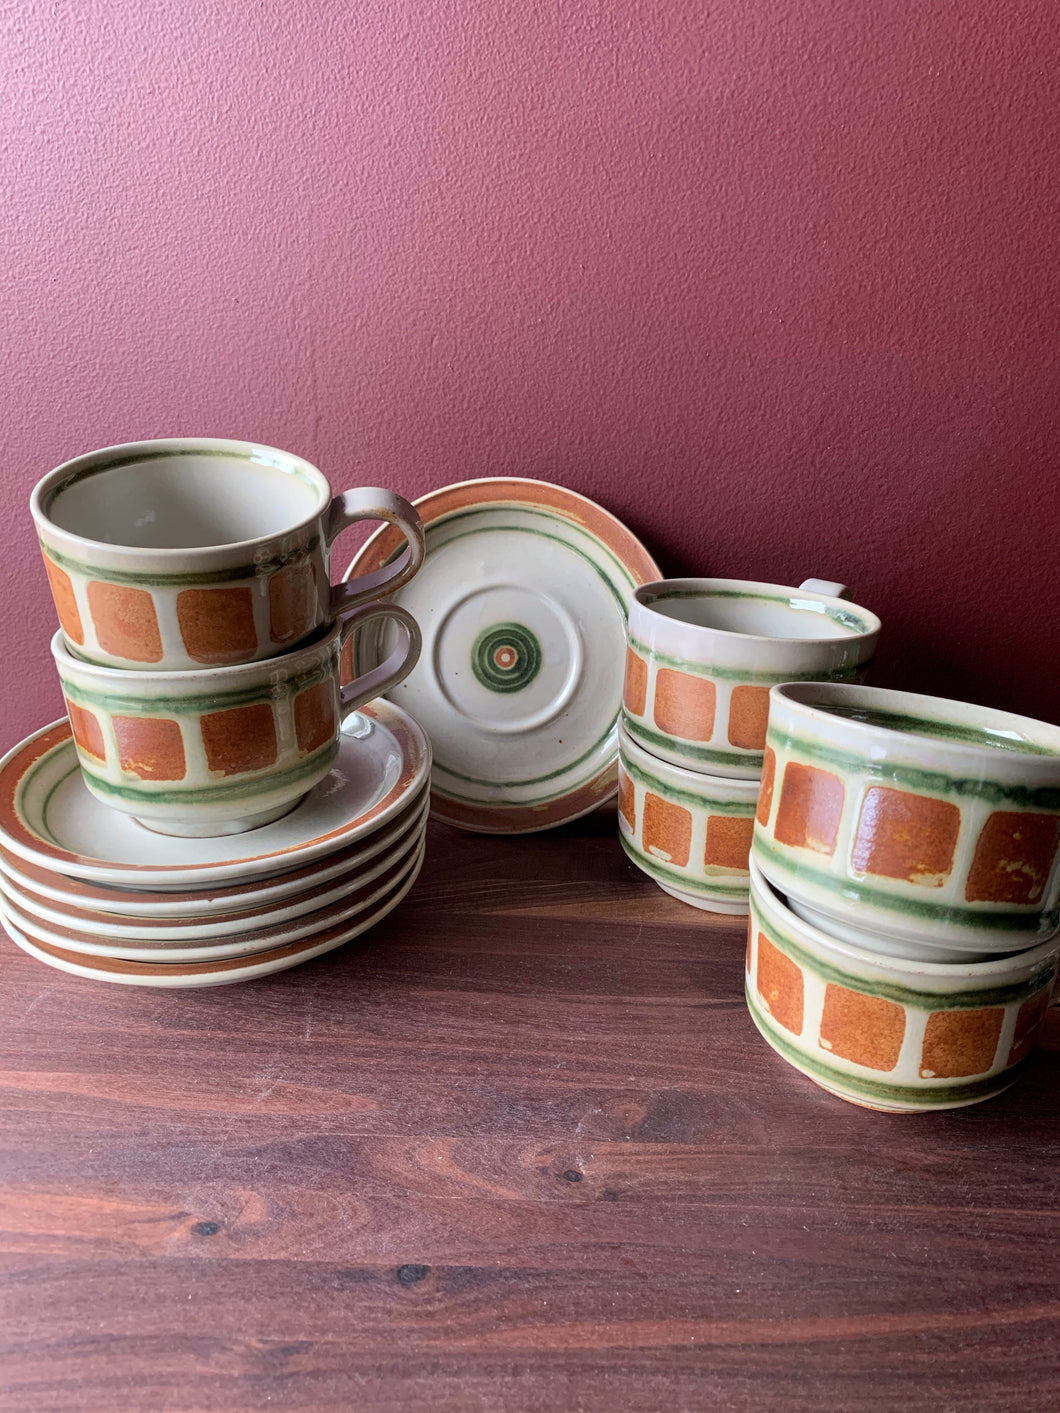 6 piece cup and saucer set “Whispering Pines”